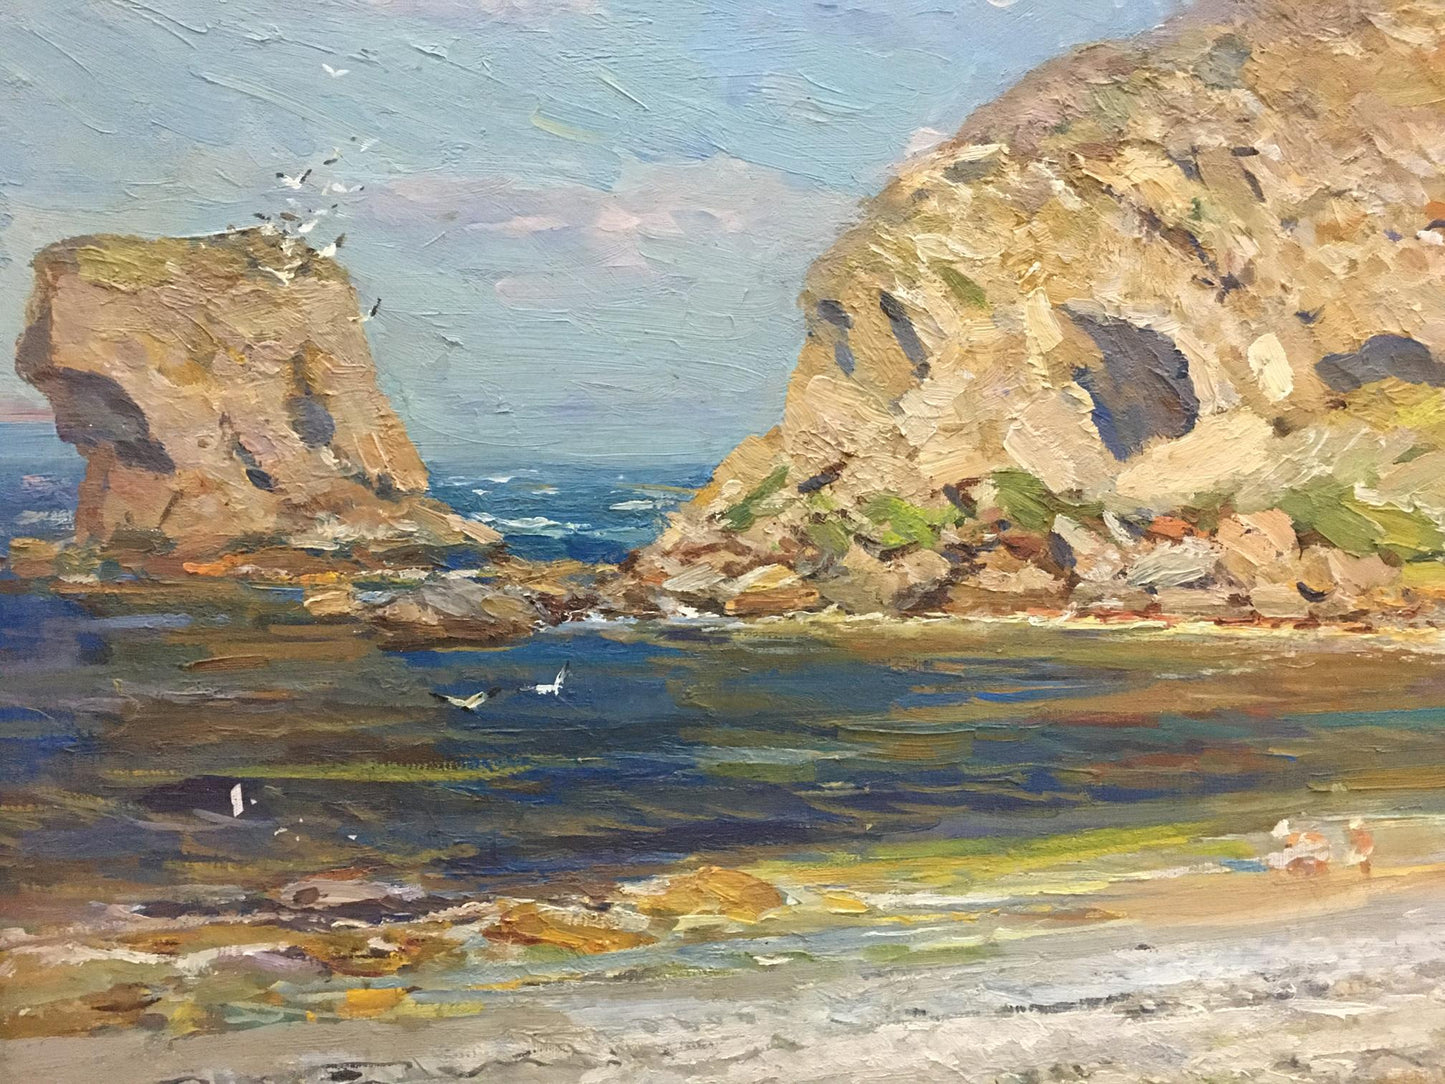 Coast depicted in oil paint by Lev Pavlovich Khodchenko